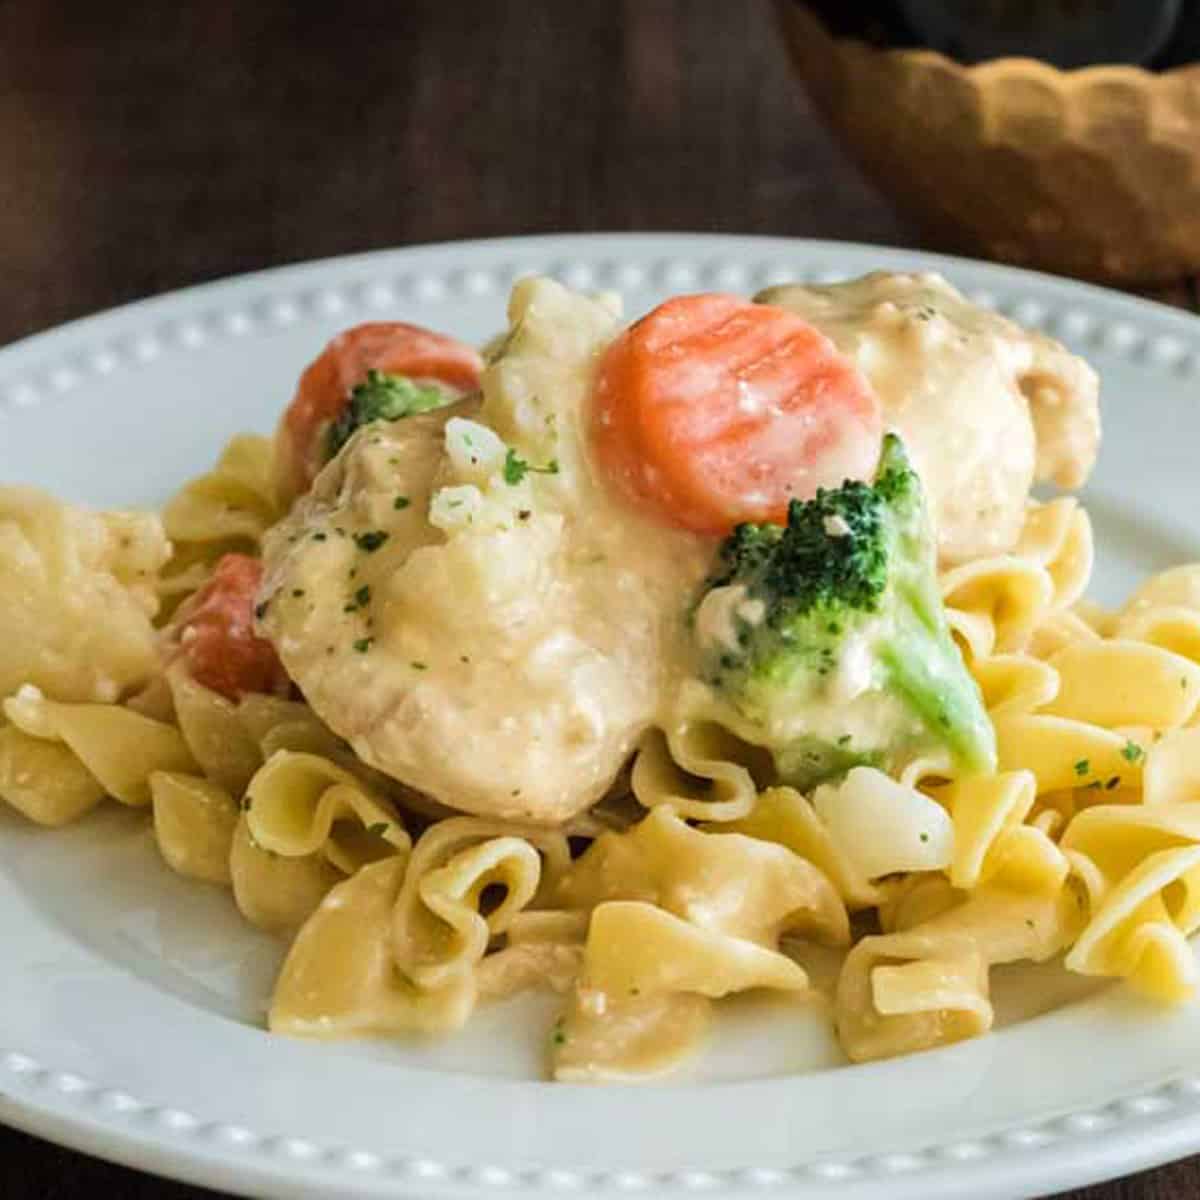 A plate of creamy chicken over noodles.